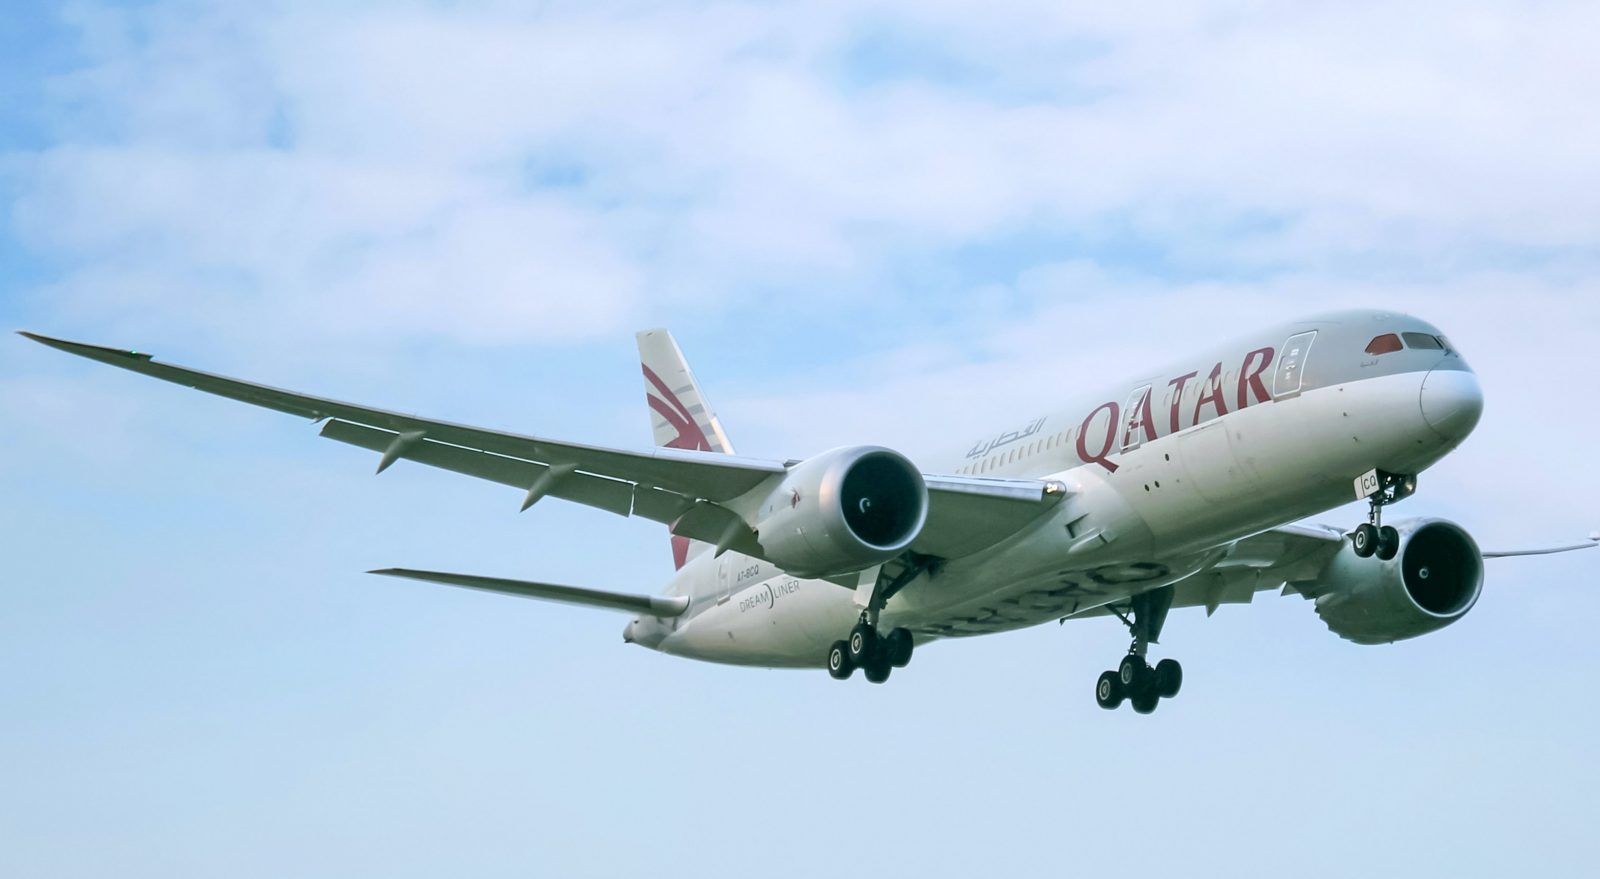 Airline of the Year for 2022 goes to Qatar Airways